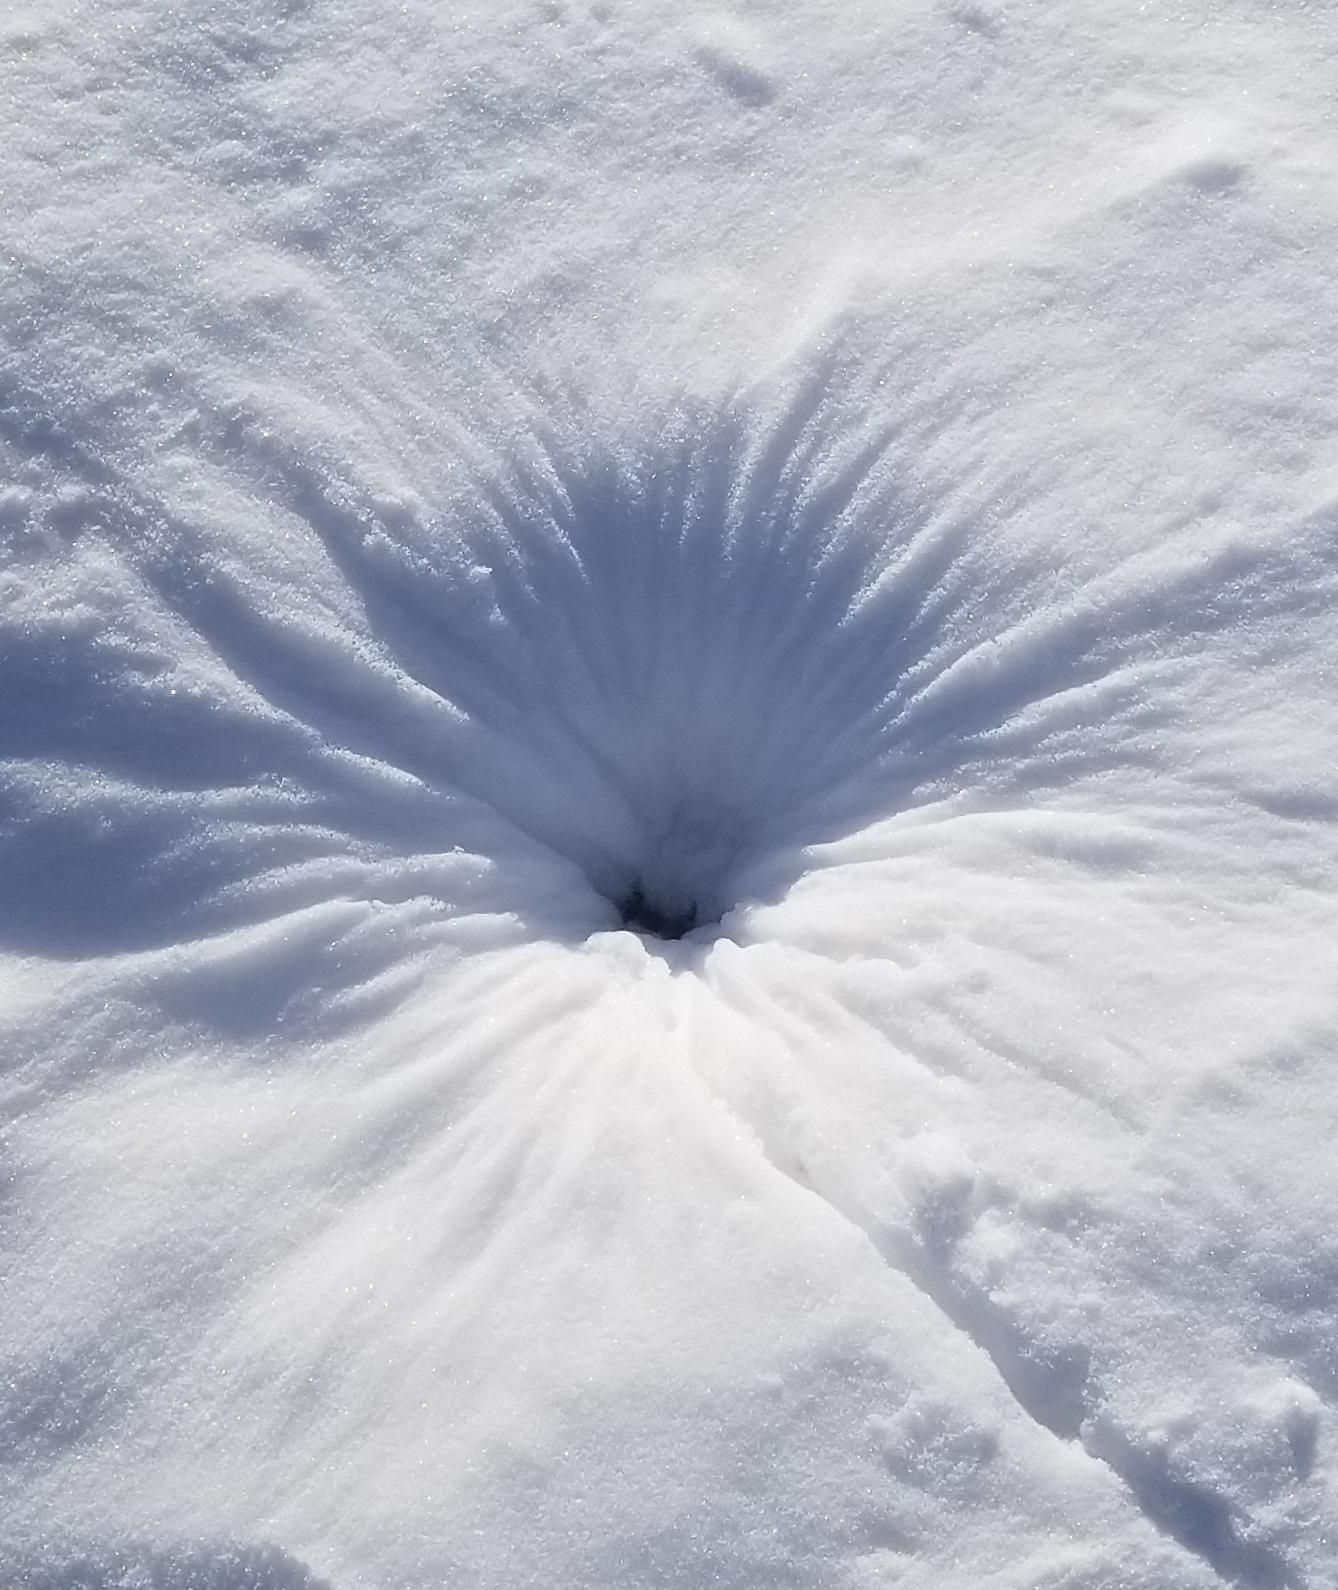 I found Earth's butthole in wintertime.